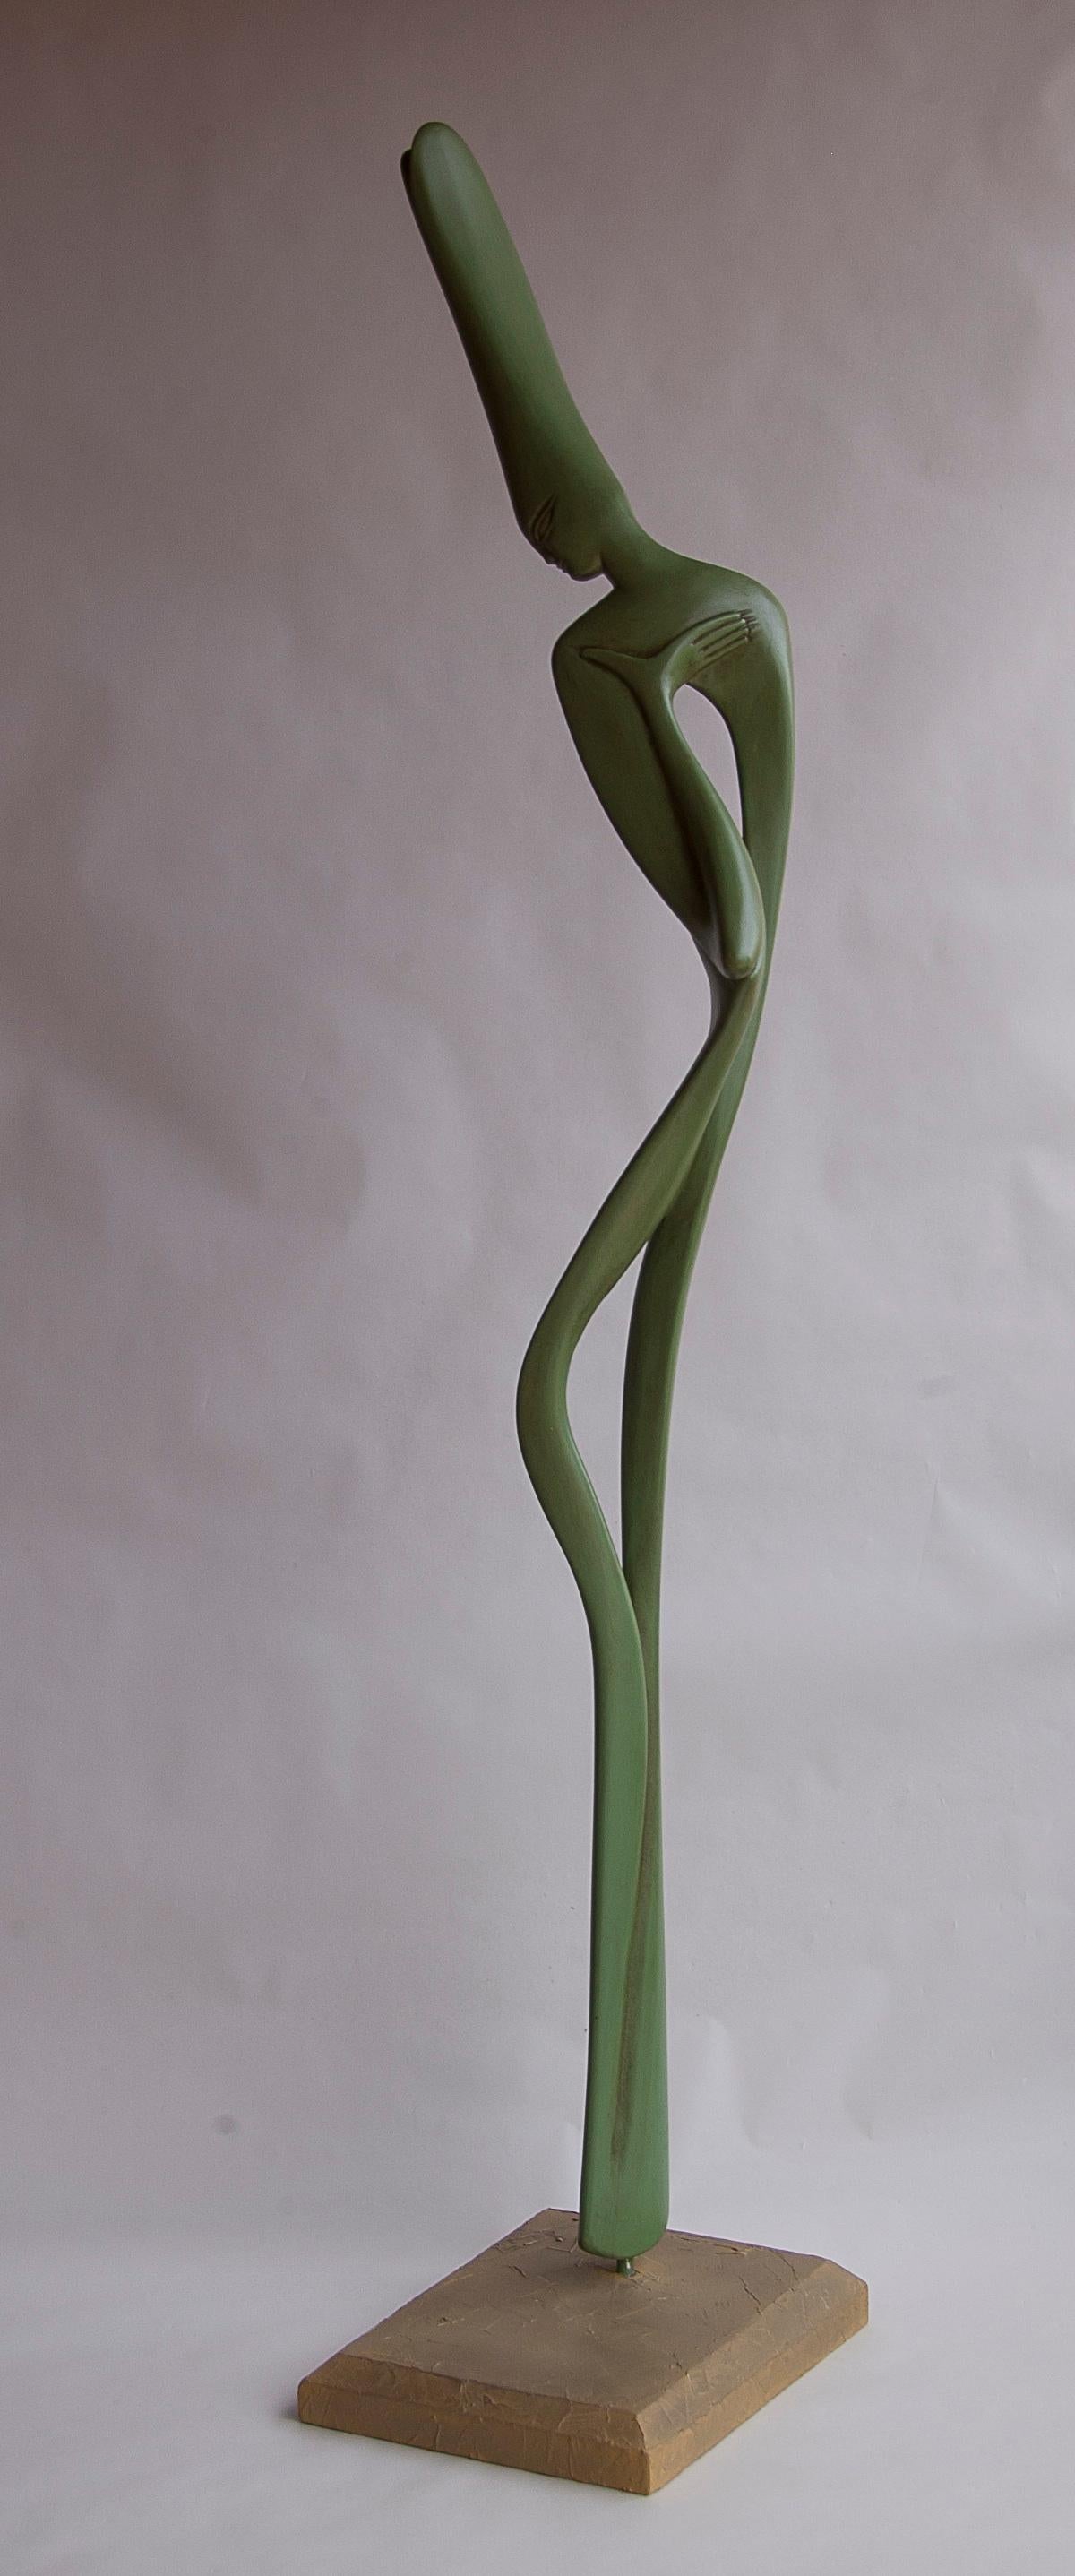 This feminine semi-abstract figurative sculpture depicts a slender woman in curves and softness, with an inner space.

The sculpture has an olive green patinated finish.

A graduate from the Academy of Fine Arts of Carrare, in Italy, Lutfi Romhein